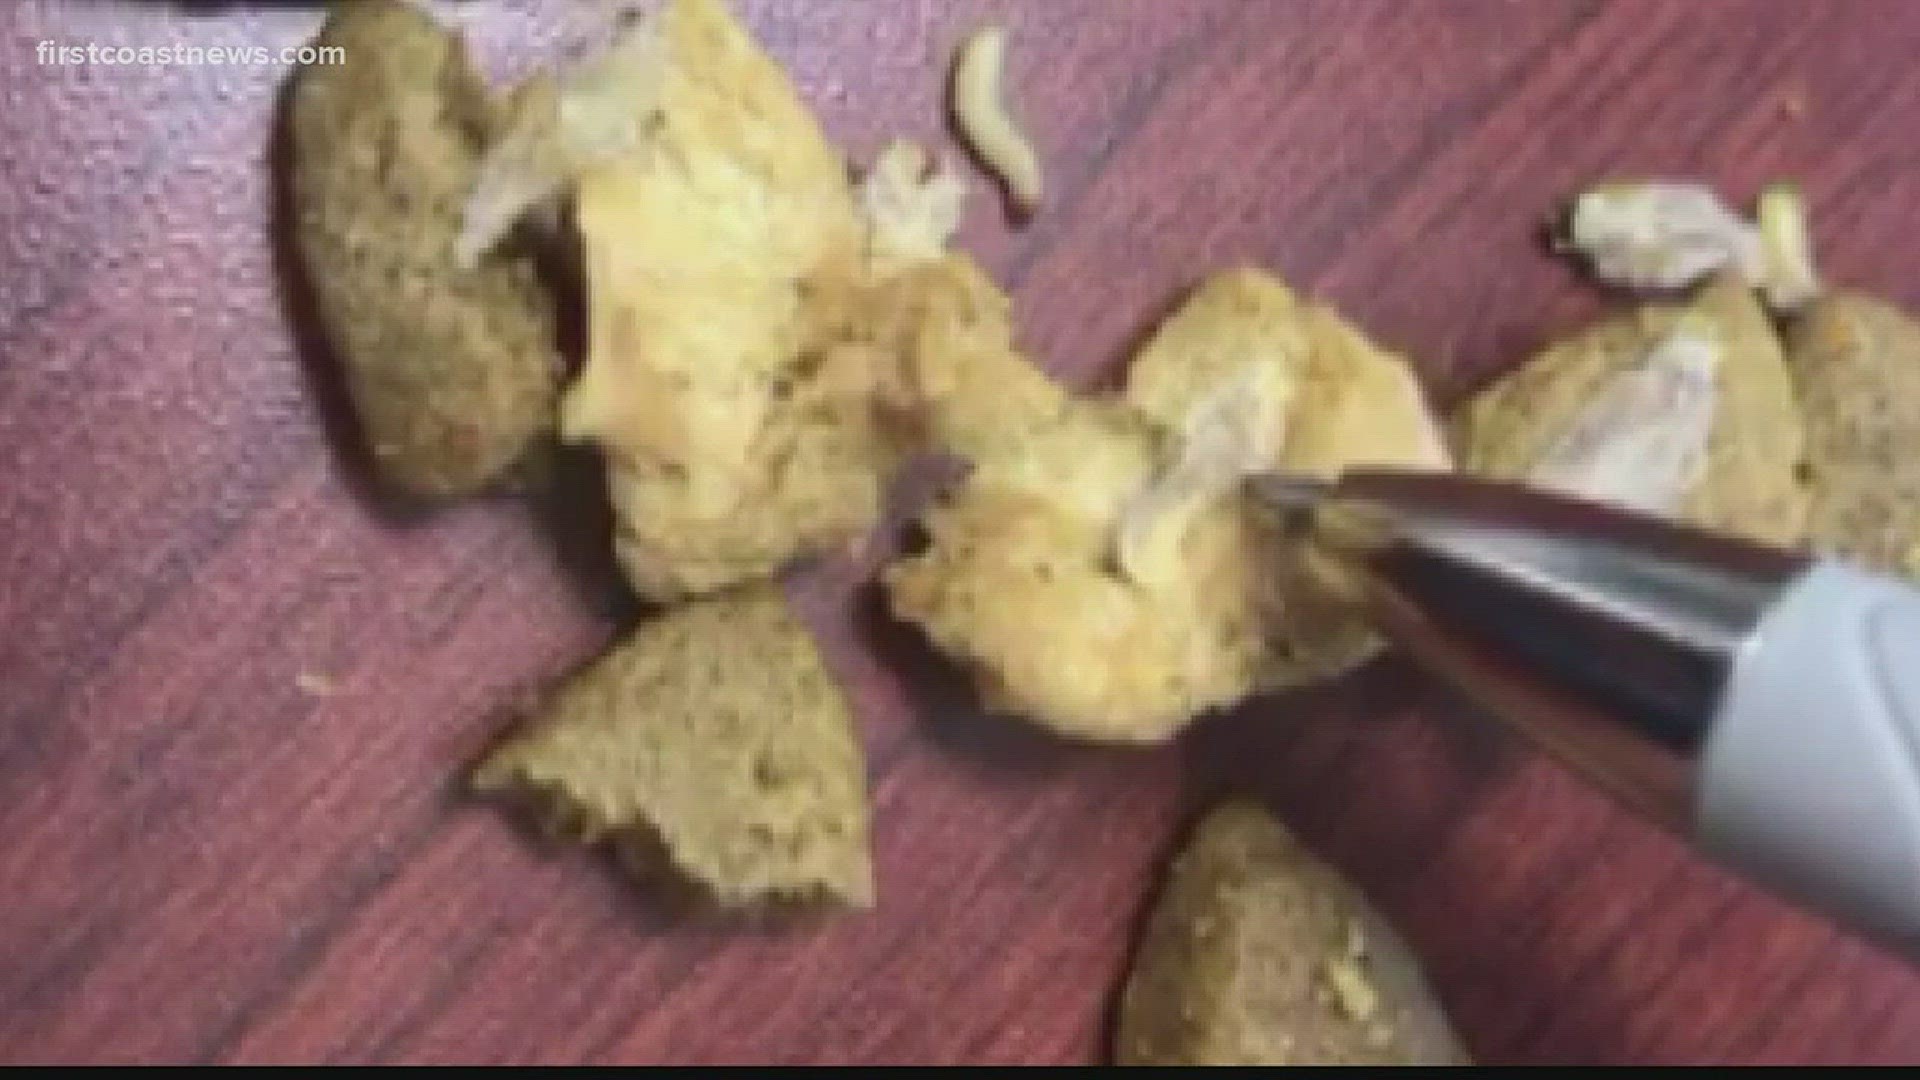 A Jacksonville man said he found what appears to be maggots inside his dog's food. He said he found moths inside his dog's food container.